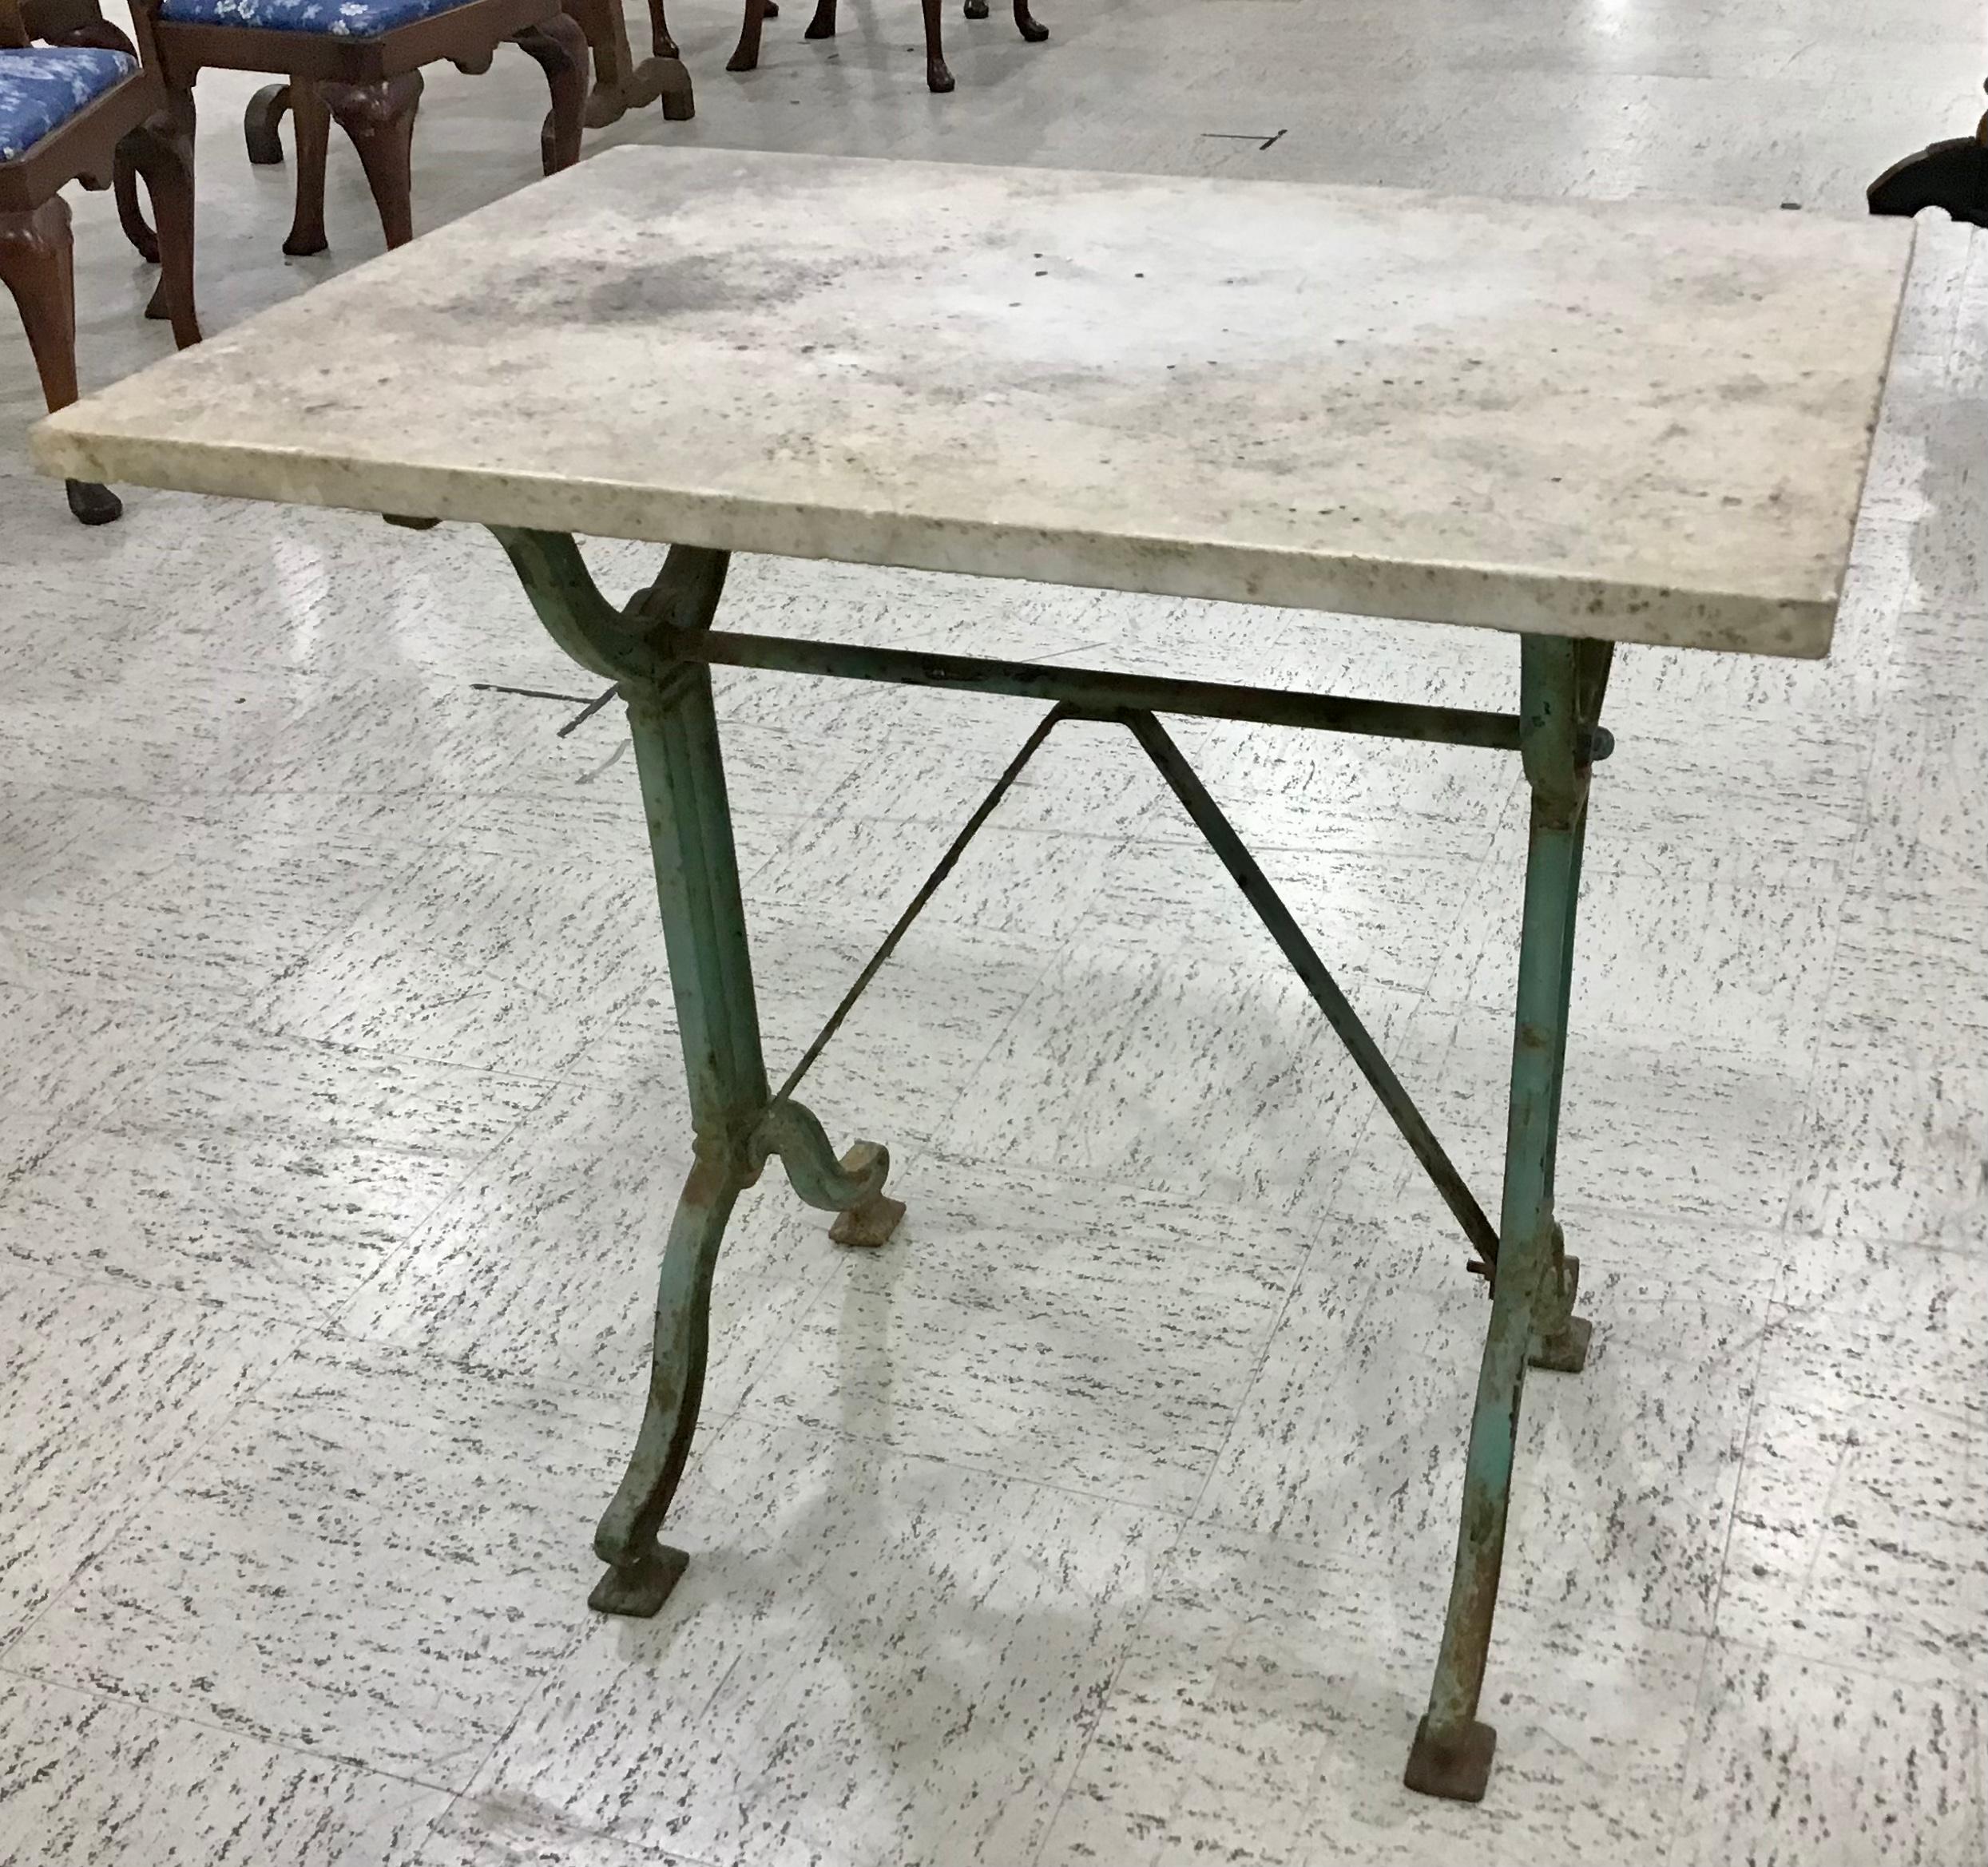 French Provincial Early 20th Century French Iron Bistro Table or Outdoor Garden Table with Marble